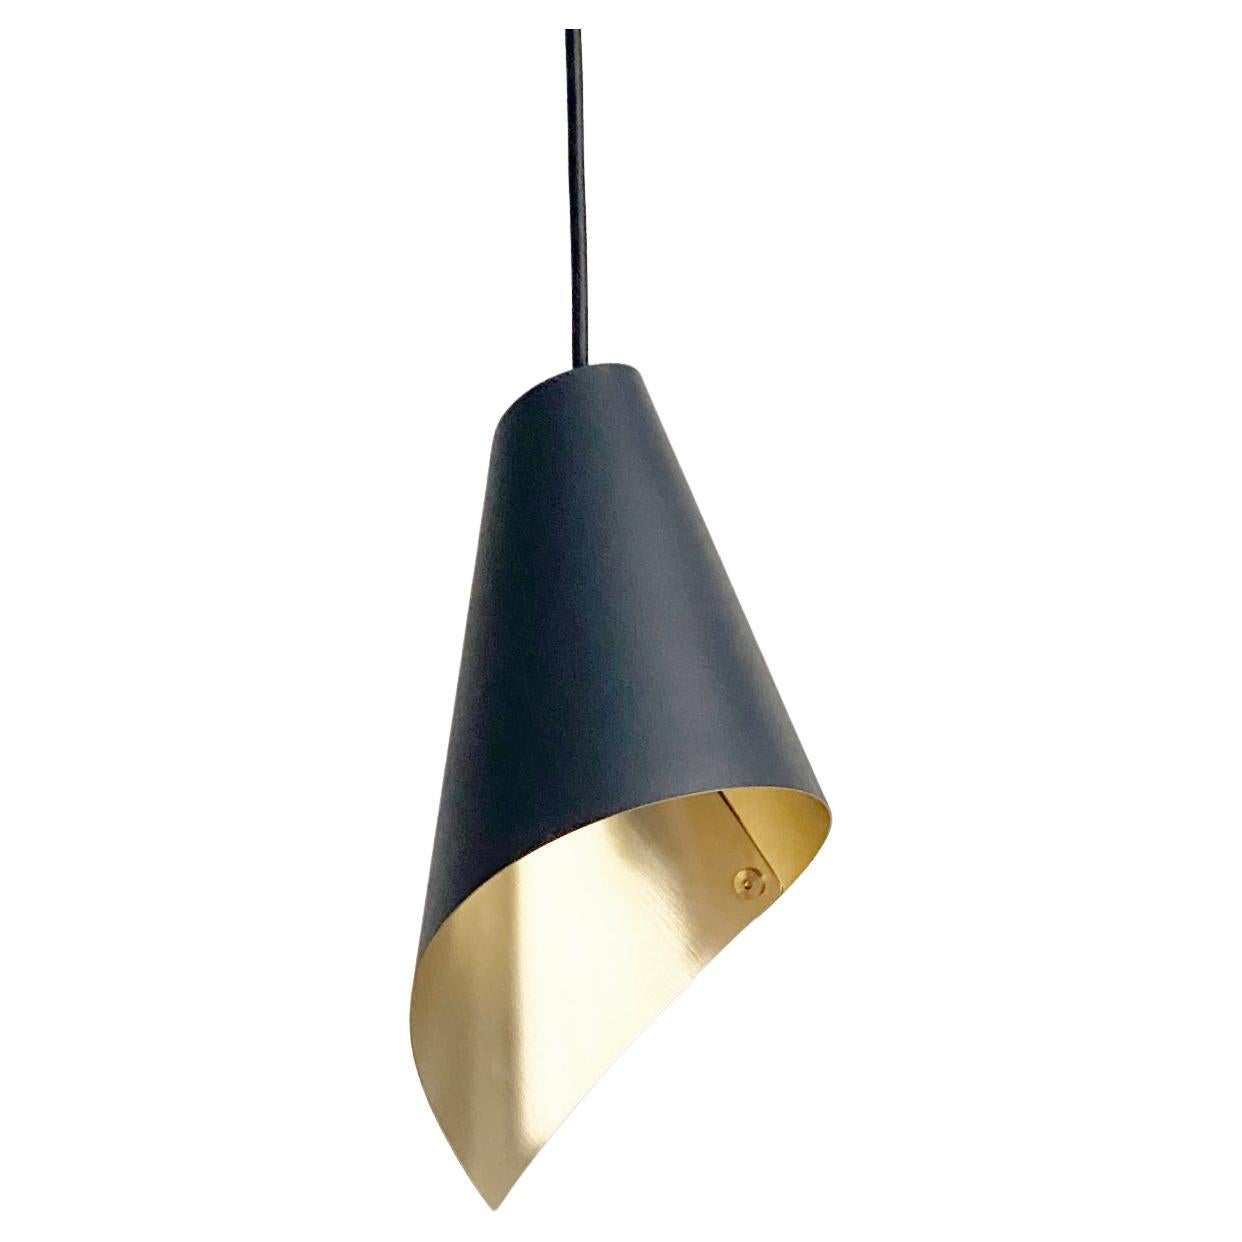 ARC Ceiling Light Pendant in Black and Brushed Brass, Made in Britain For Sale